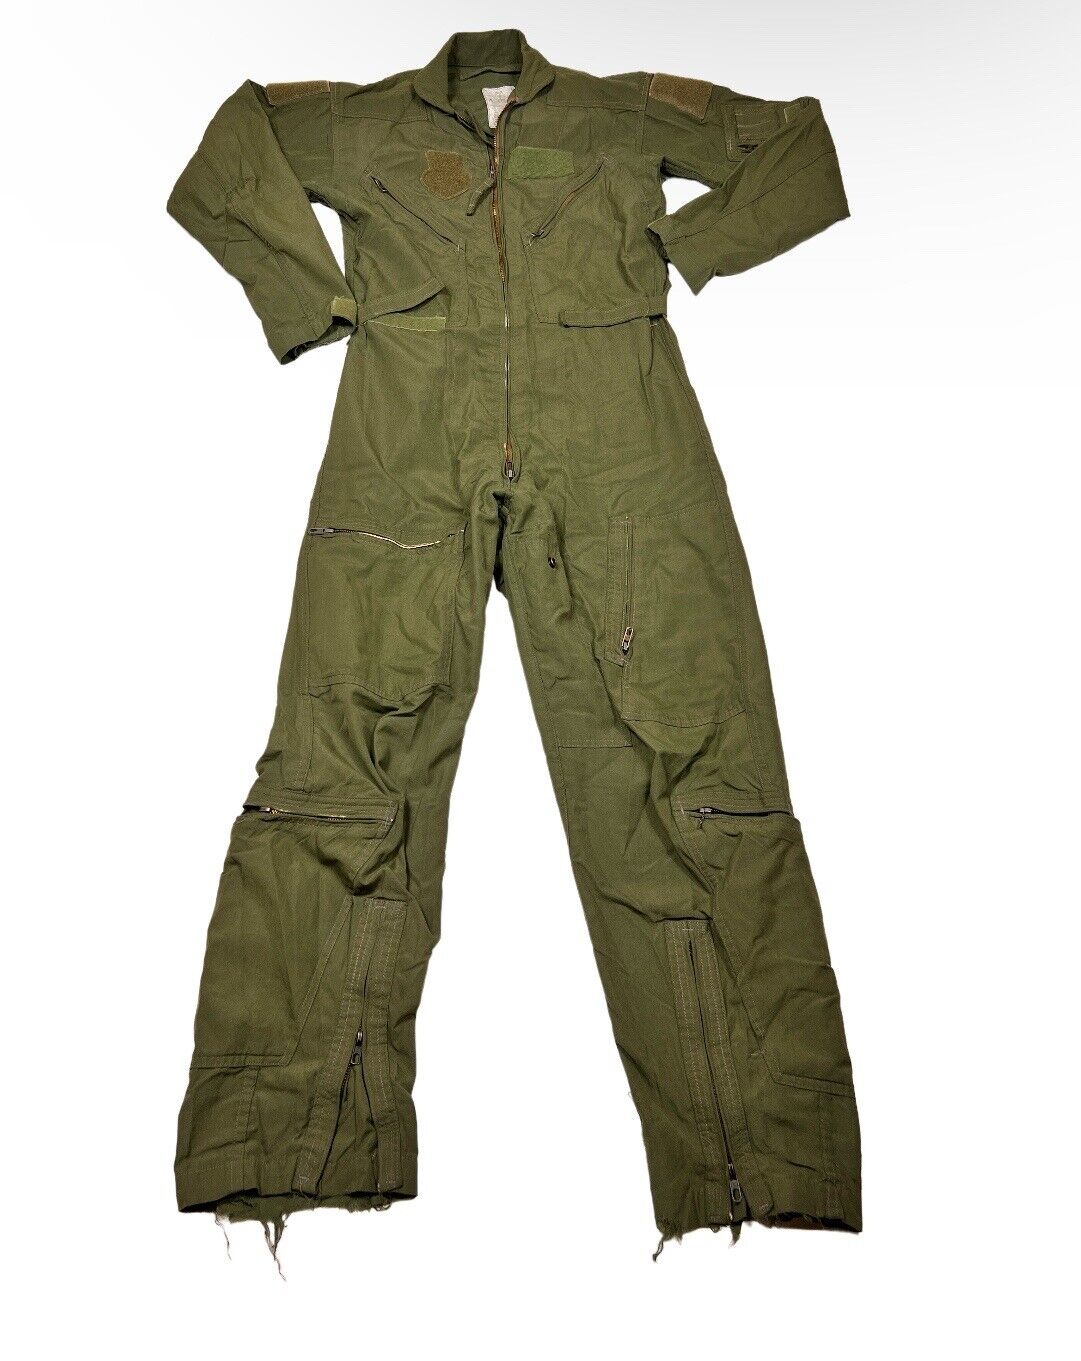 Vintage Military Flight Suit Coveralls Flyers Fighter Sage Green USA Men’s 38X30